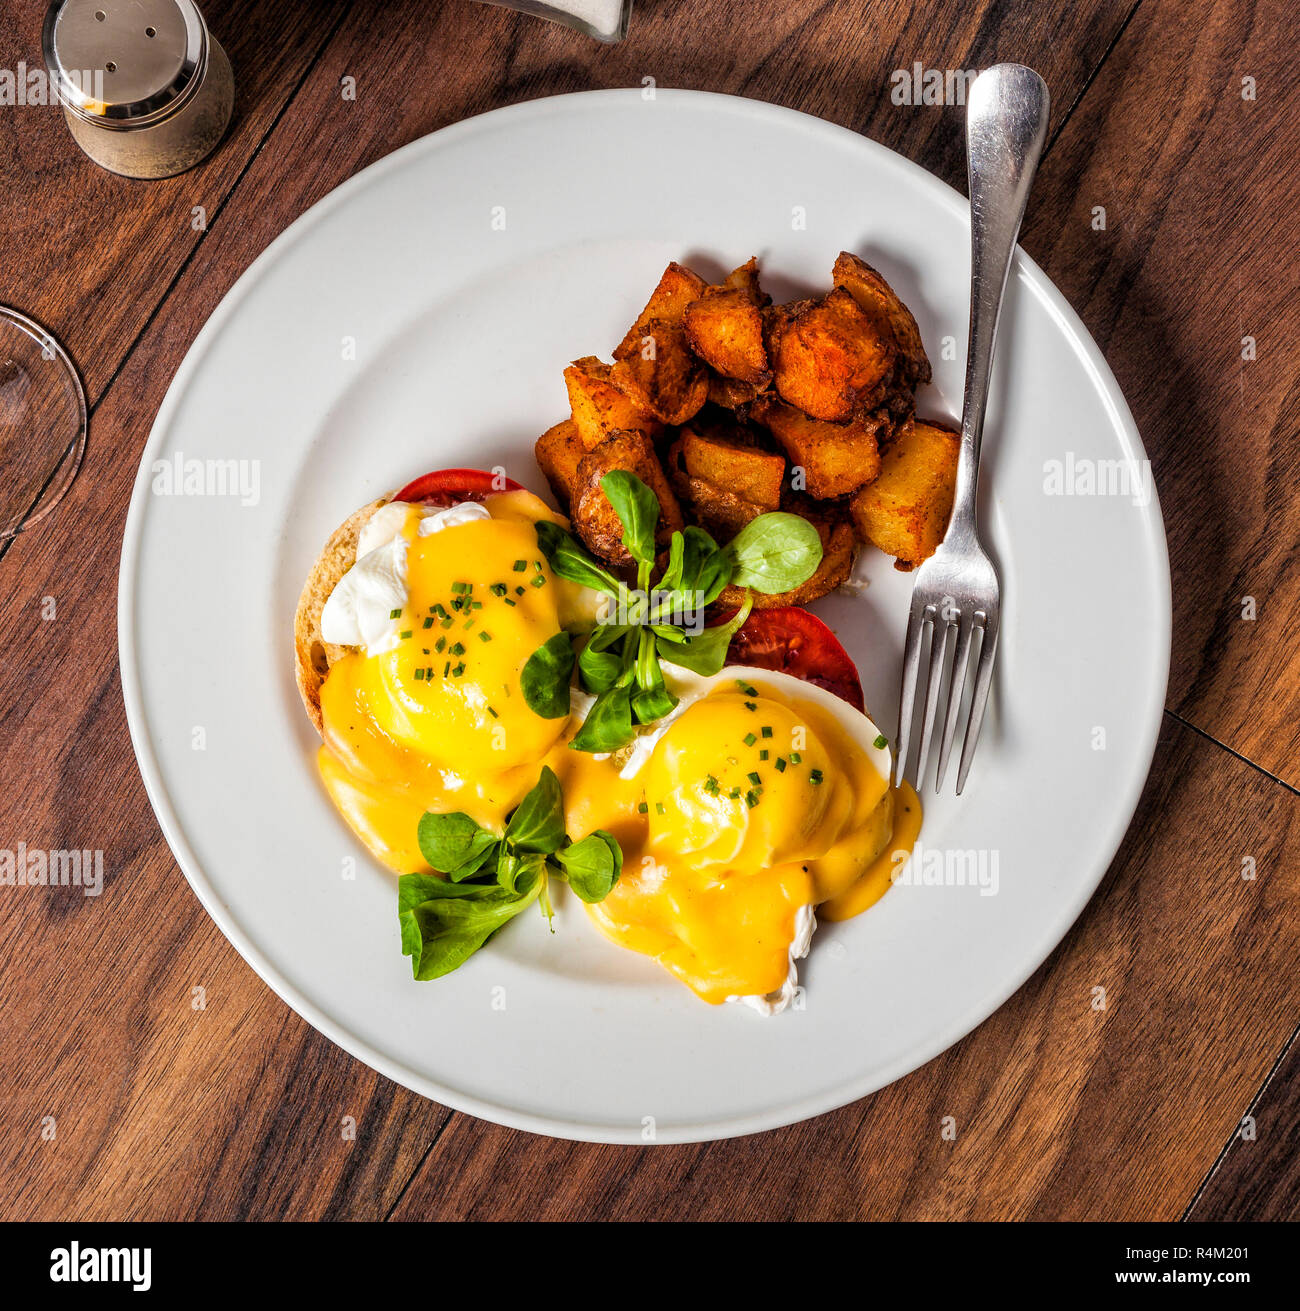 Eggs Benedict is a traditional American breakfast or brunch dish  with bacon, ham, a poached egg, and hollandaise sauce. Stock Photo